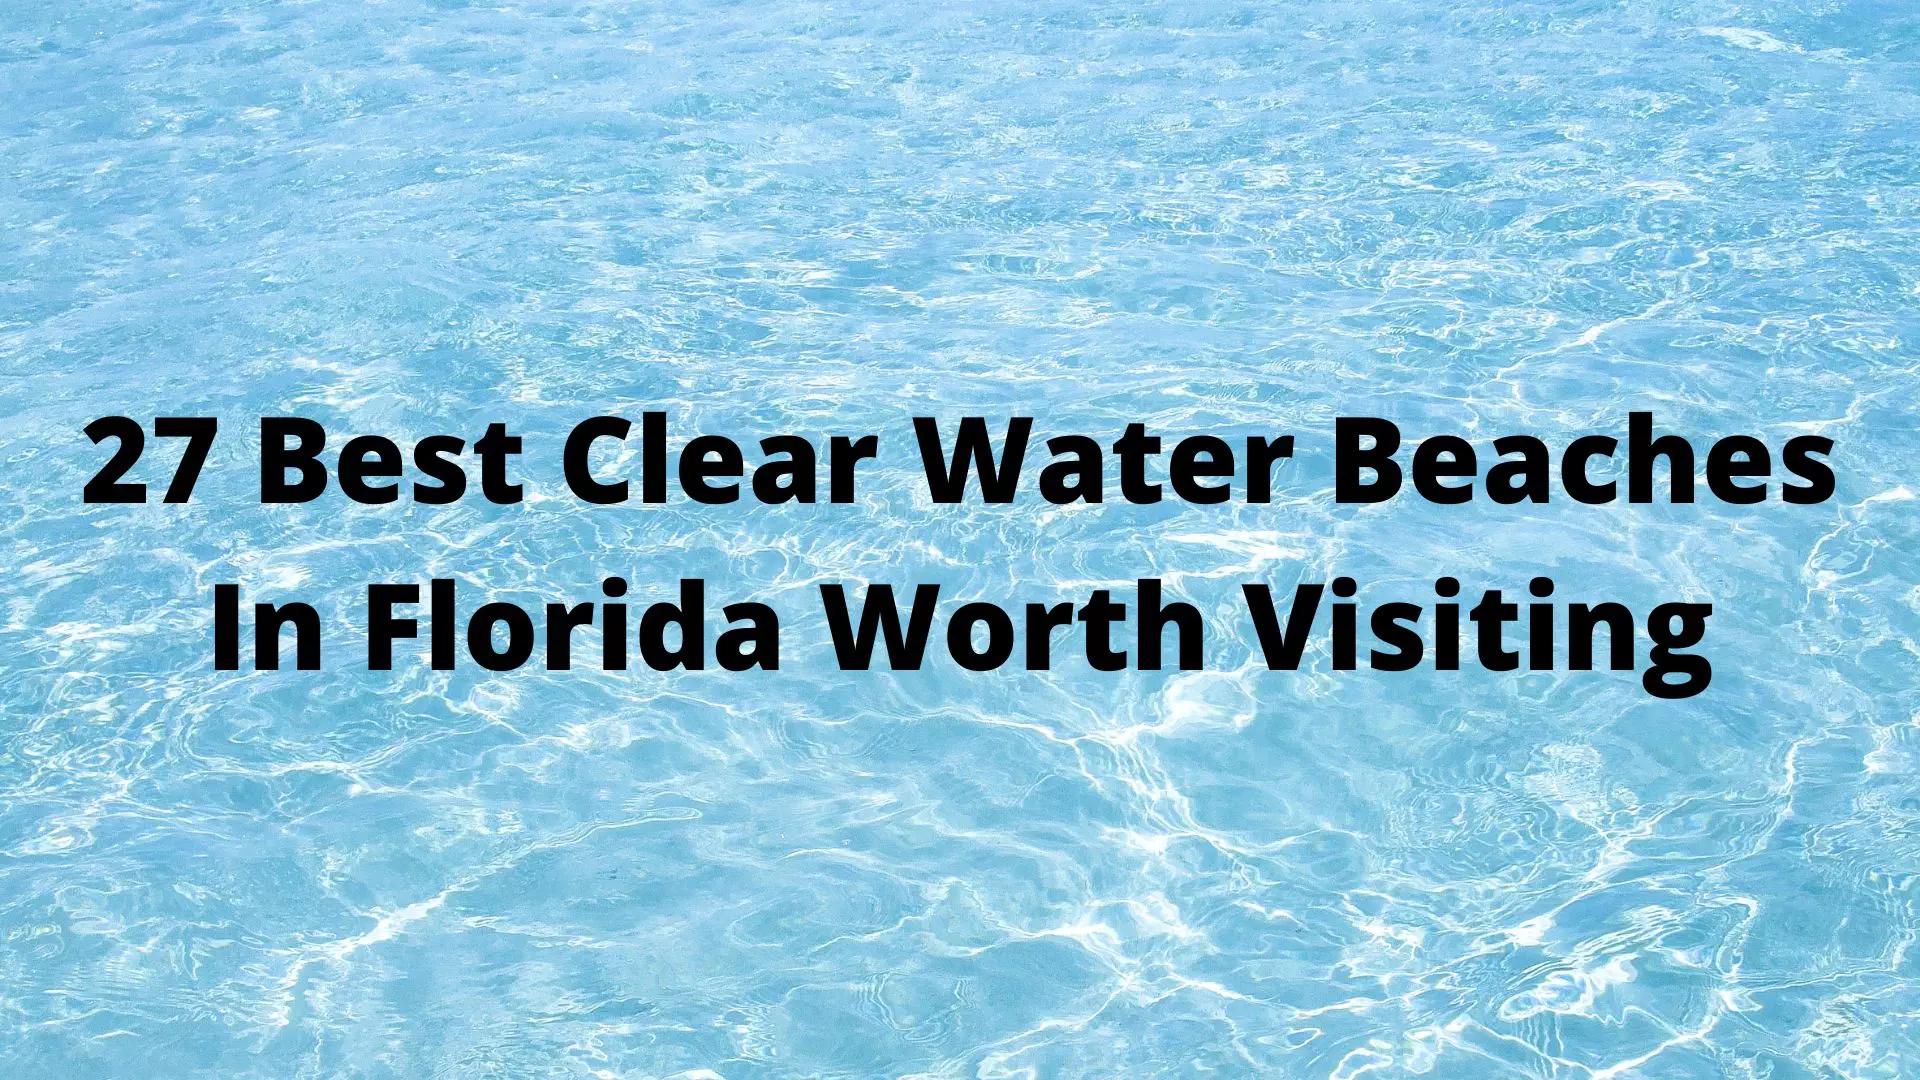 27 Best Clear Water Beaches In Florida Worth Visiting